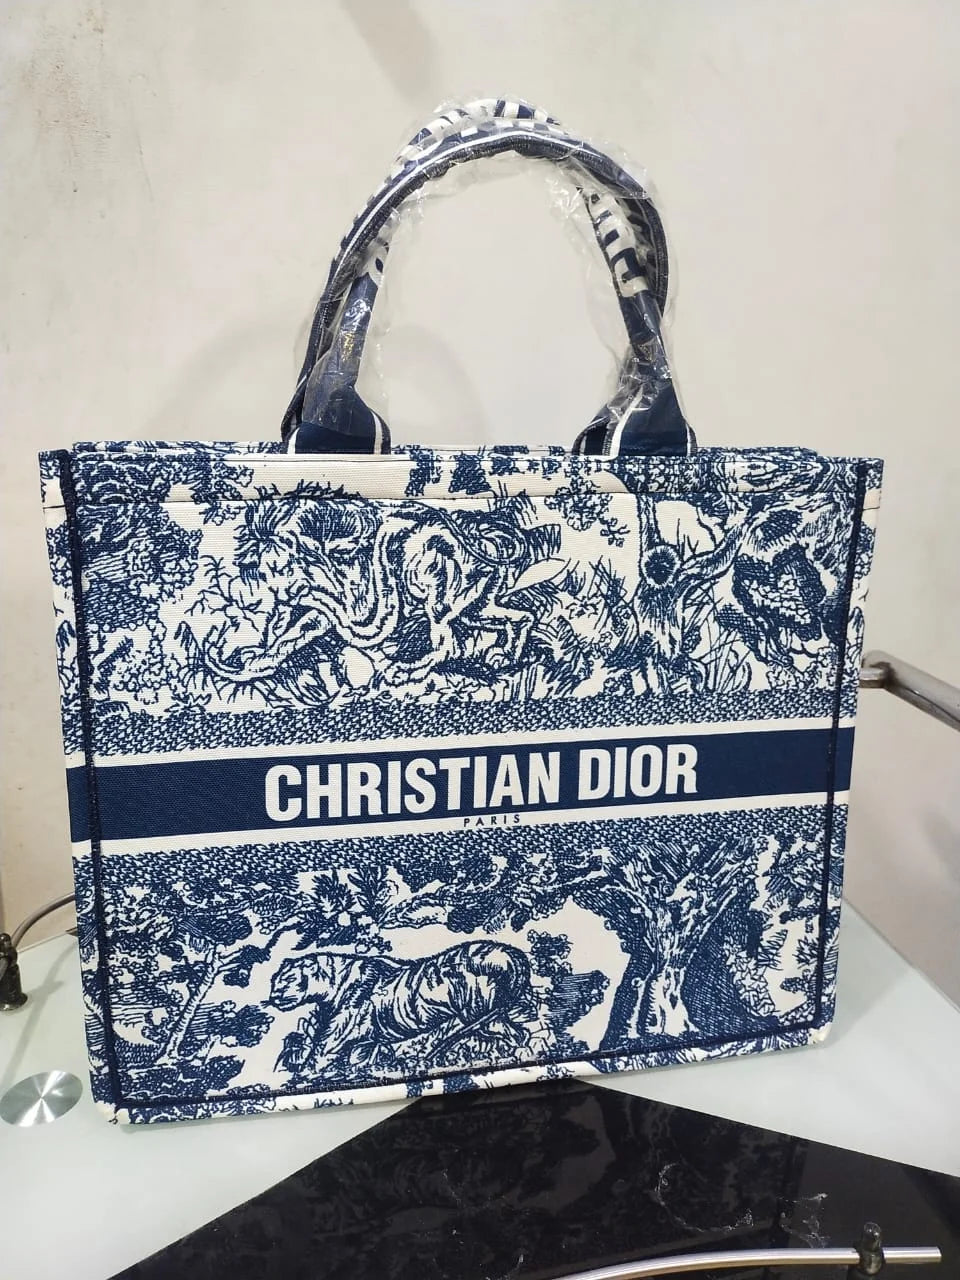 COMBO DEAL - DIOR SLIDES WITH DIOR BOOK TOTE BAG - JUNGLE BLUE